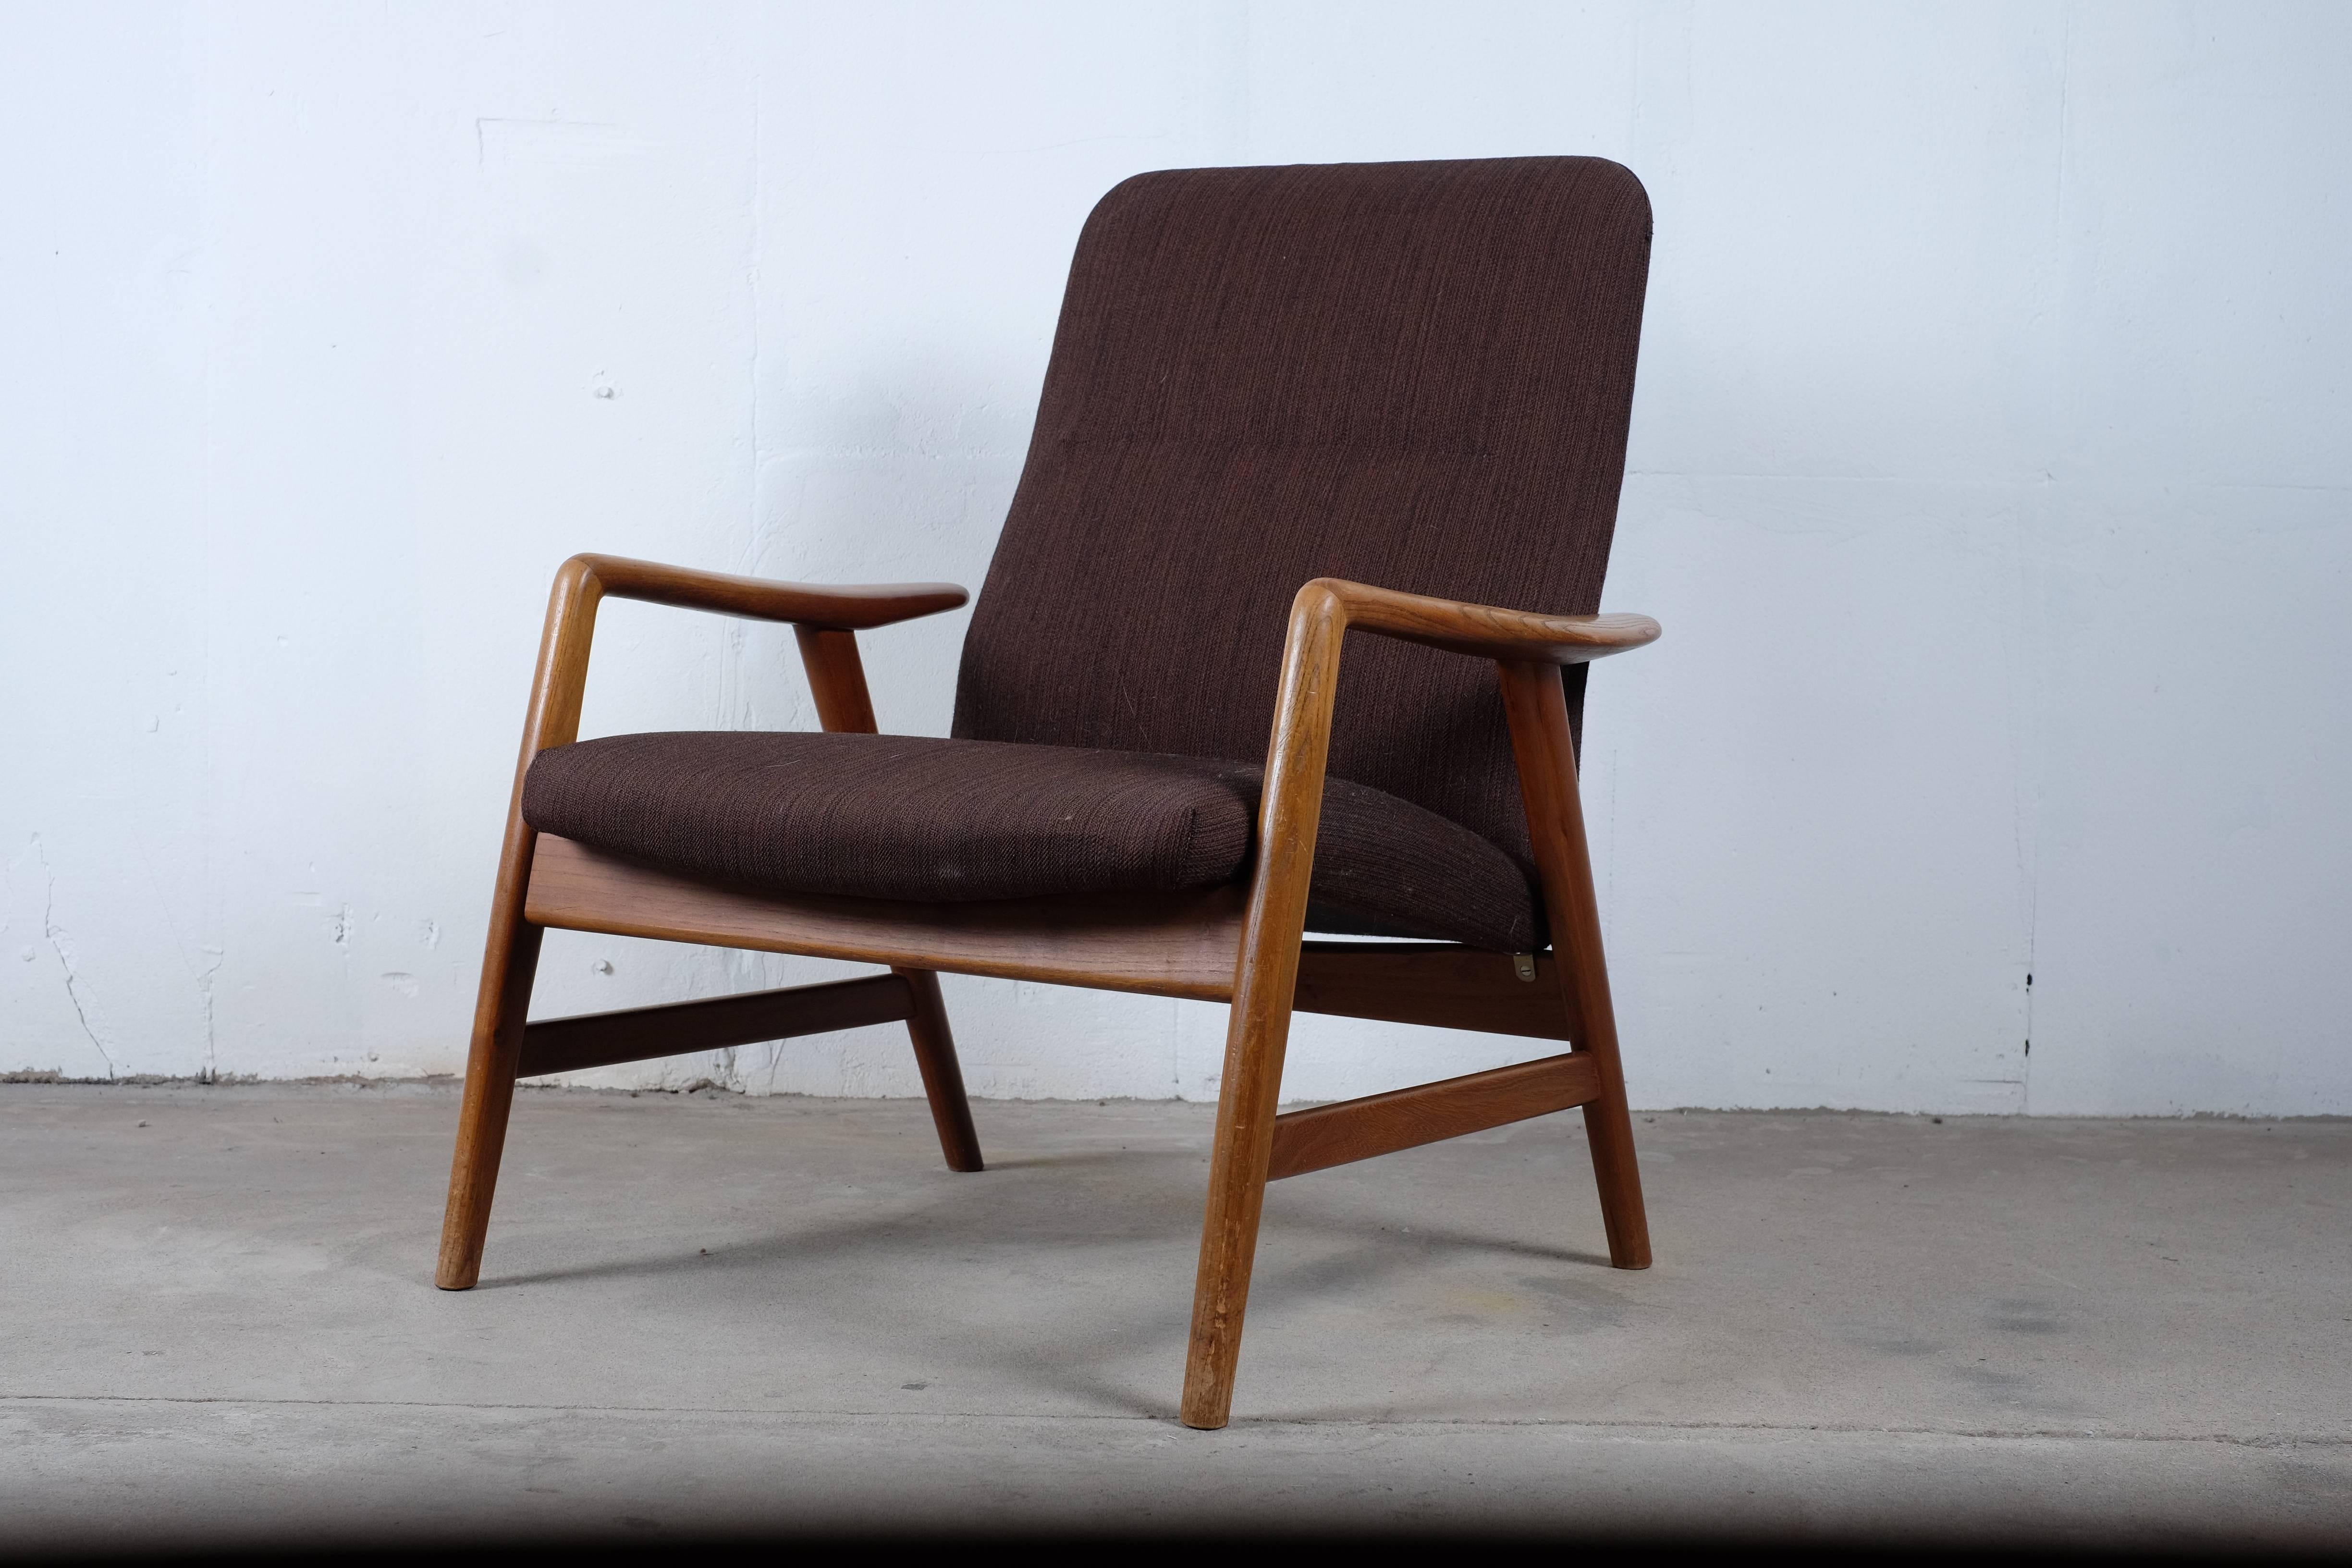 This stunning Danish modern low back lounge chair was designed by Alf Svensson for Fritz Hansen in 1957. 

The frame features beautifully sculpted teak arms and spindle legs. The reclined backrest allows you to sit comfortable in the chair for